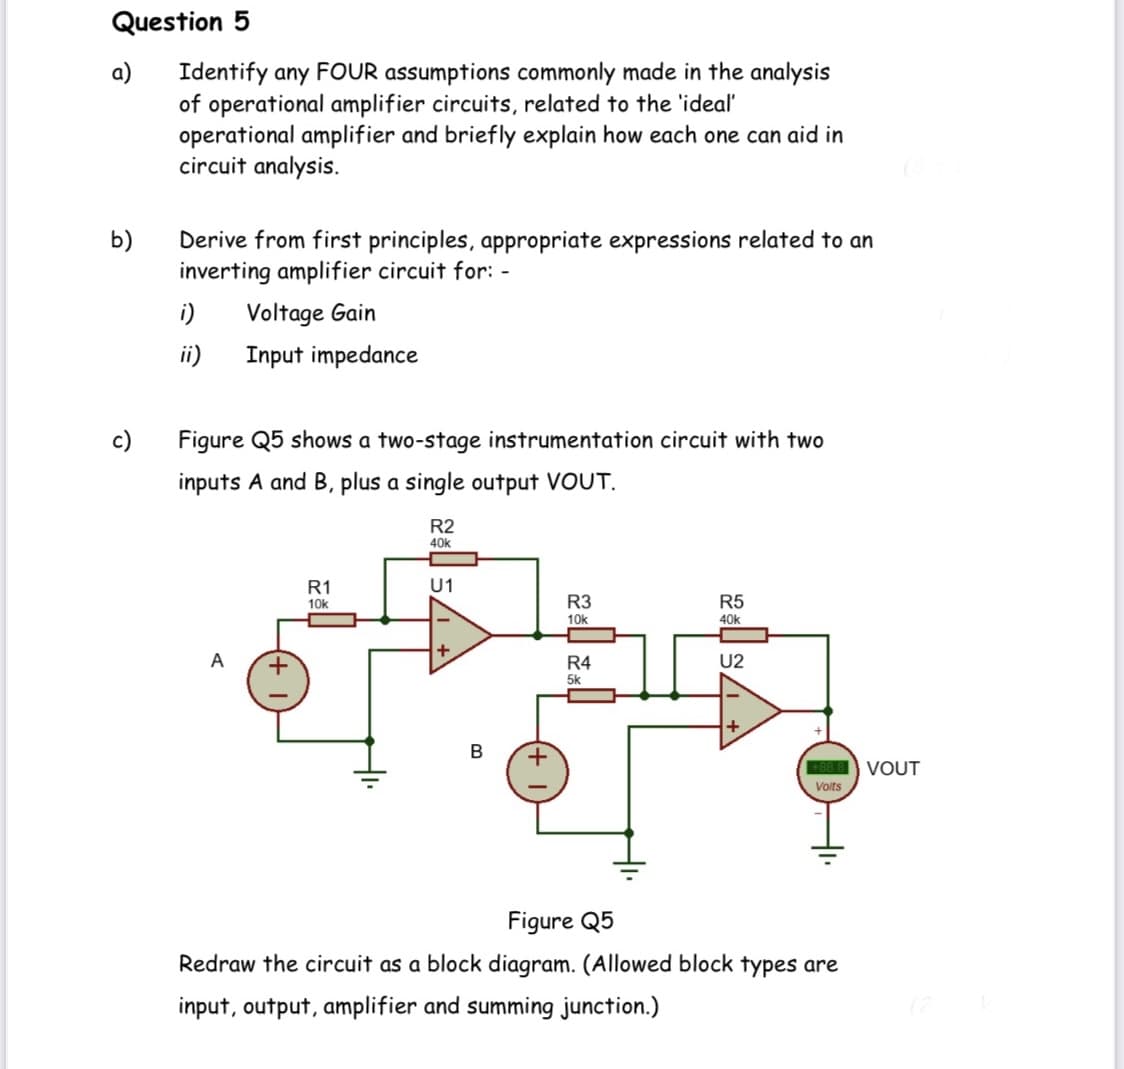 Question 5
a)
Identify any FOUR assumptions commonly made in the analysis
of operational amplifier circuits, related to the 'ideal
operational amplifier and briefly explain how each one can aid in
circuit analysis.
b)
Derive from first principles, appropriate expressions related to an
inverting amplifier circuit for: -
i)
Voltage Gain
ii)
Input impedance
c)
Figure Q5 shows a two-stage instrumentation circuit with two
inputs A and B, plus a single output VOUT.
R2
40k
R1
U1
10k
R3
R5
10k
40k
+
A
R4
U2
5k
+
В
88 8 VOUT
Volts
Figure Q5
Redraw the circuit as a block diagram. (Allowed block types are
input, output, amplifier and summing junction.)
